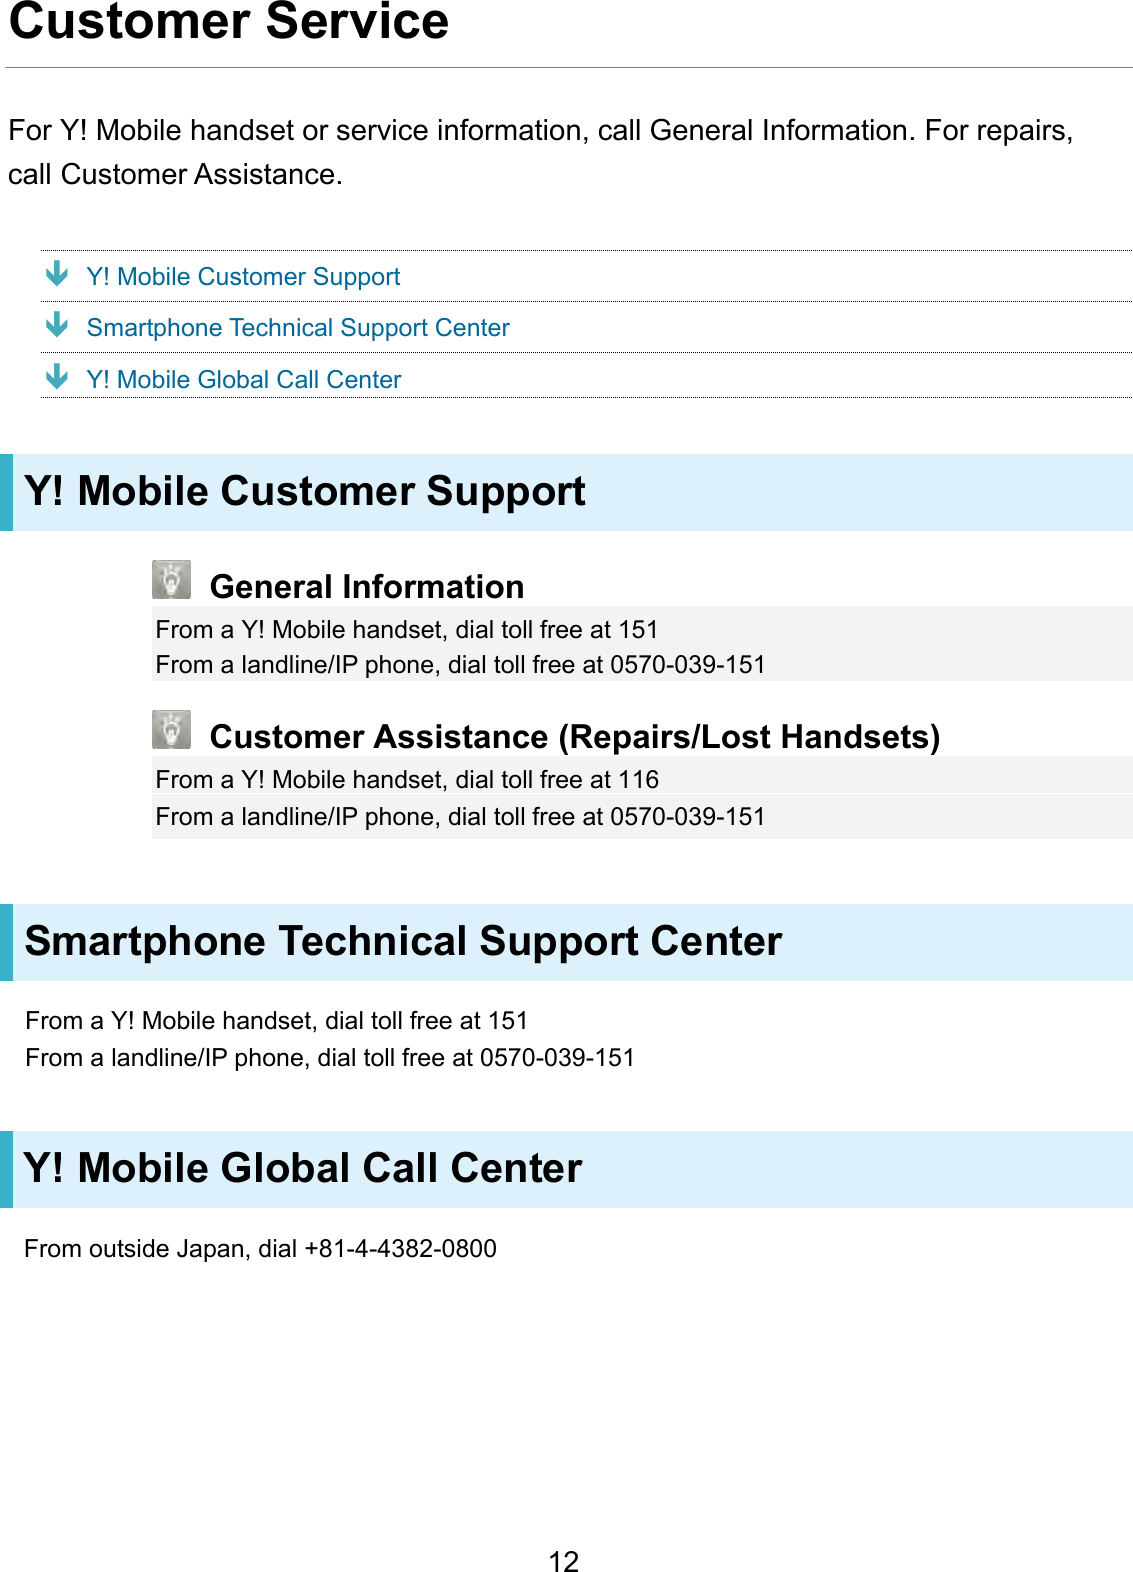 Customer Service For Y! Mobile handset or service information, call General Information. For repairs, call Customer Assistance. Y! Mobile Customer Support Smartphone Technical Support Center Y! Mobile Global Call Center Y! Mobile Customer Support General Information From a Y! Mobile handset, dial toll free at 151 From a landline/IP phone, dial toll free at 0570-039-151 Customer Assistance (Repairs/Lost Handsets) From a Y! Mobile handset, dial toll free at 116 From a landline/IP phone, dial toll free at 0570-039-151 Smartphone Technical Support Center From a Y! Mobile handset, dial toll free at 151 From a landline/IP phone, dial toll free at 0570-039-151 Y! Mobile Global Call Center From outside Japan, dial +81-4-4382-0800 12